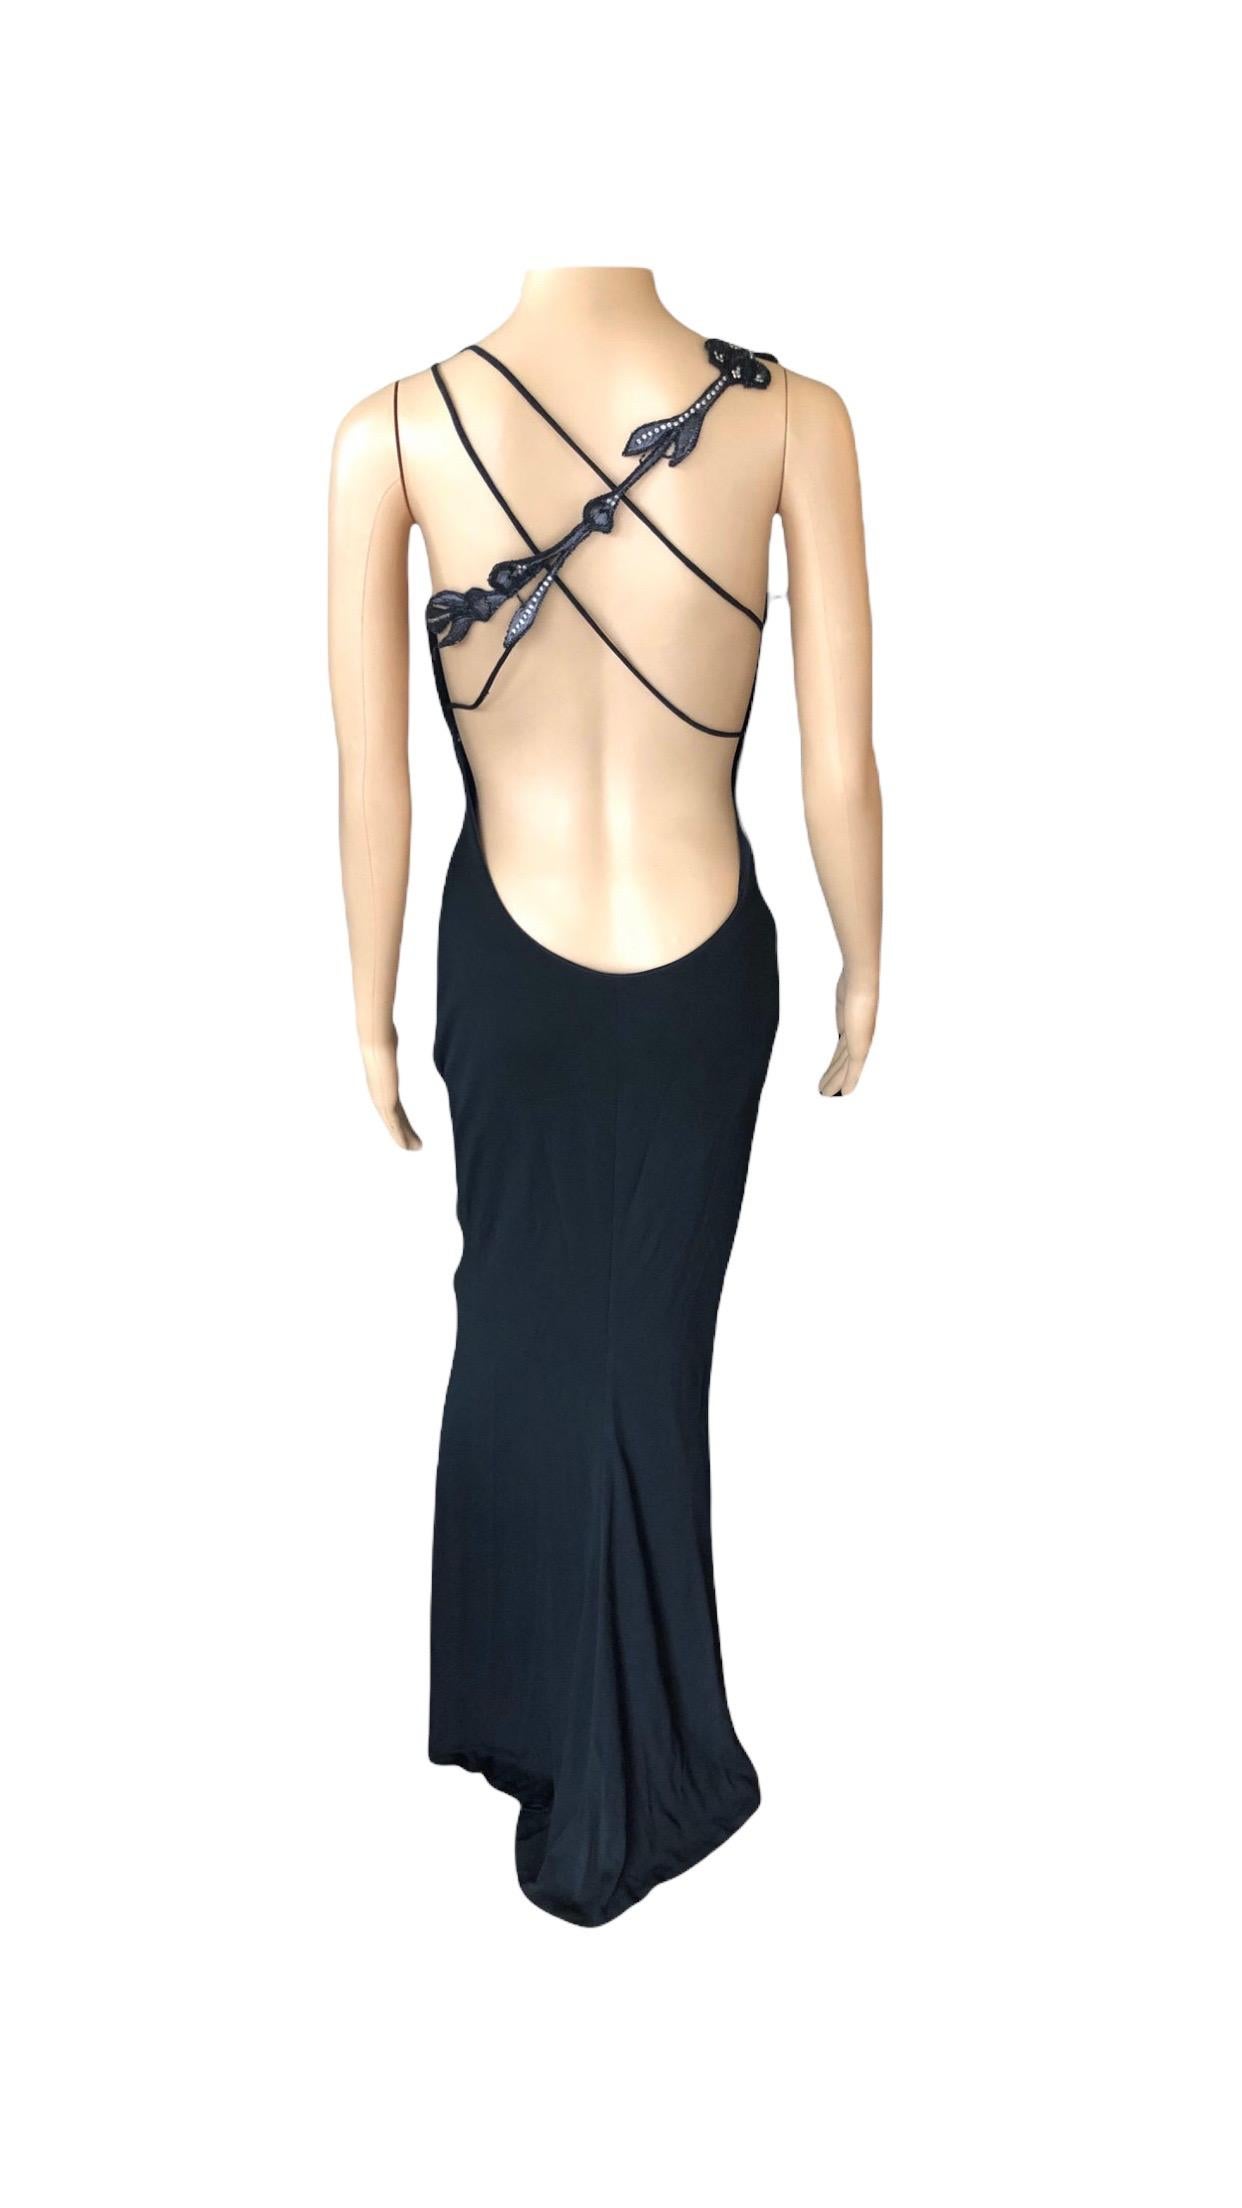 Atelier Versace by Gianni Versace Haute Couture Embellished Evening Dress Gown For Sale 1